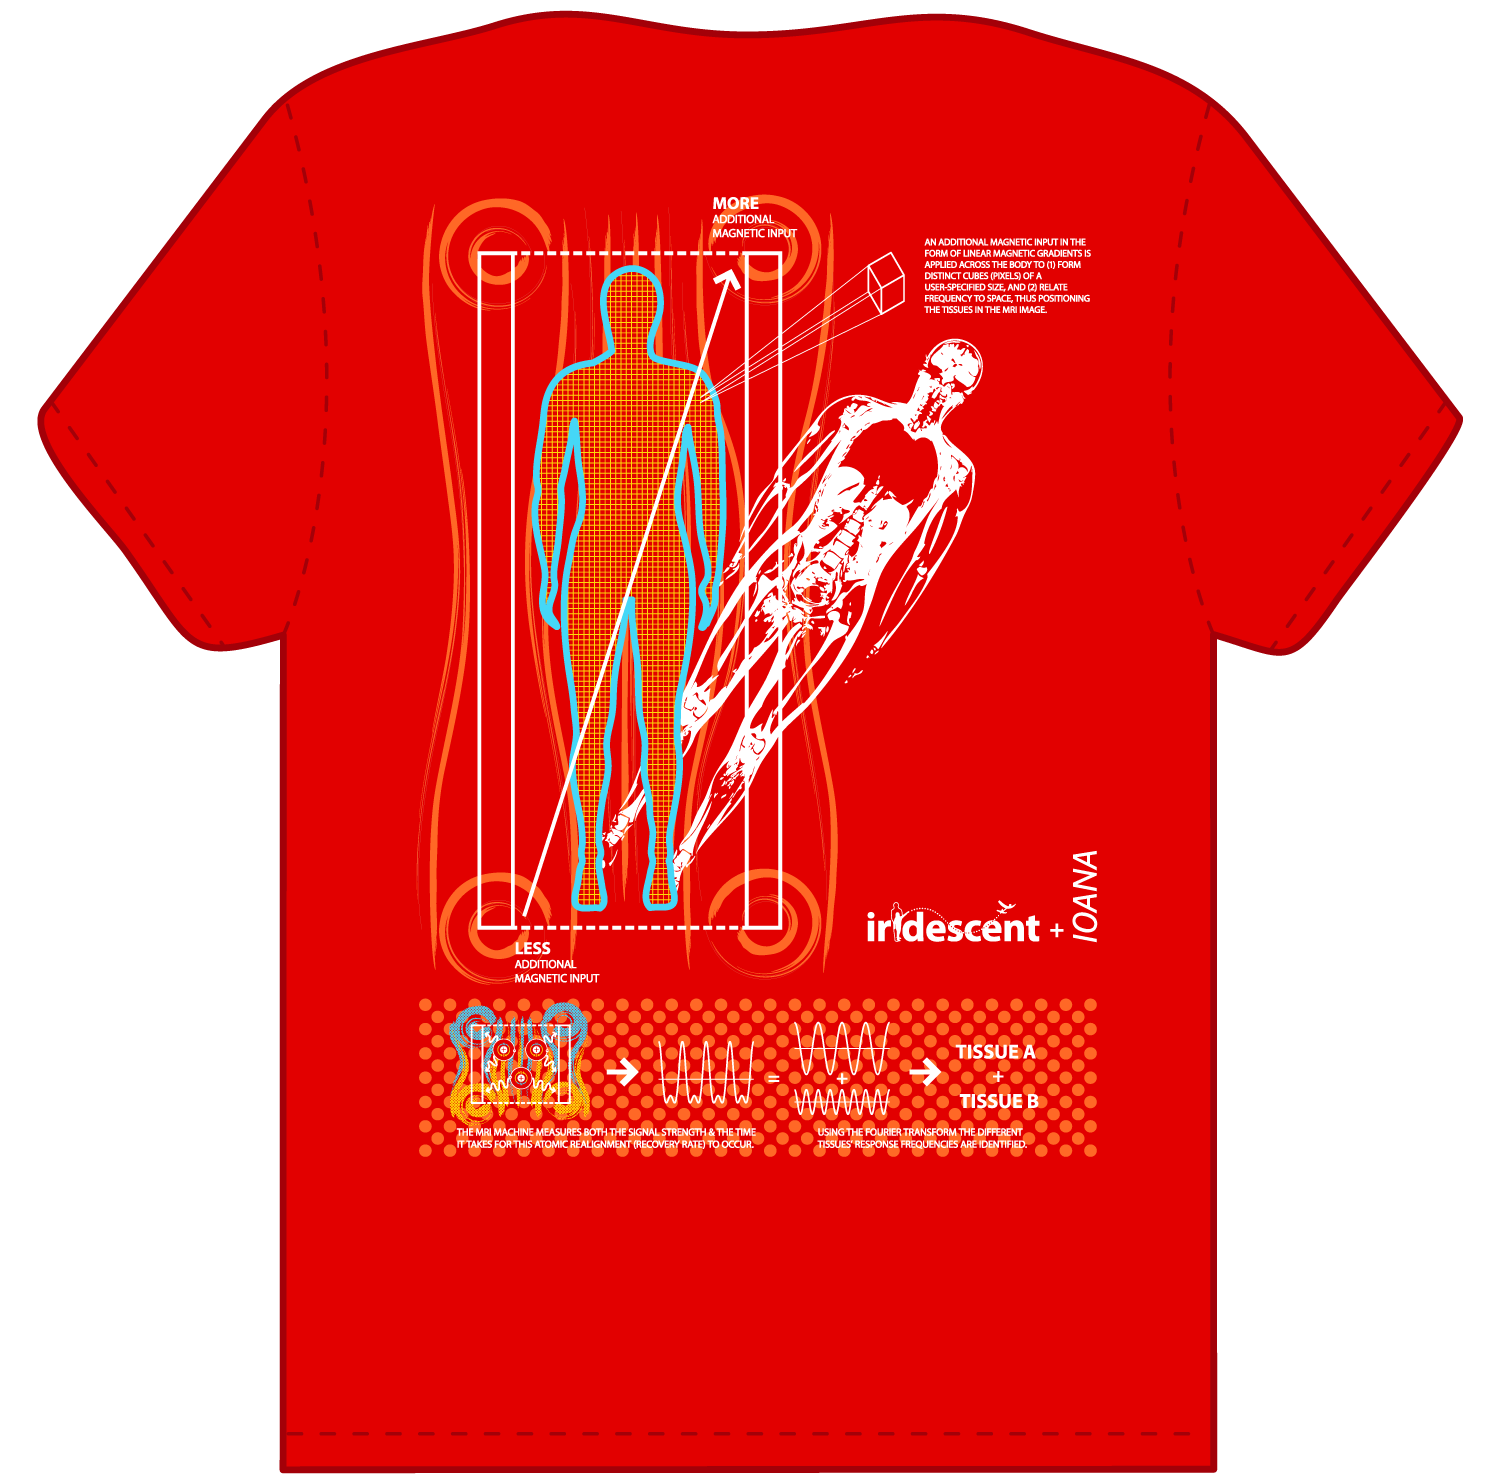 back of T-shirt on the MRI process showing tissue wavelengths and how the image is produced, for Iridescent